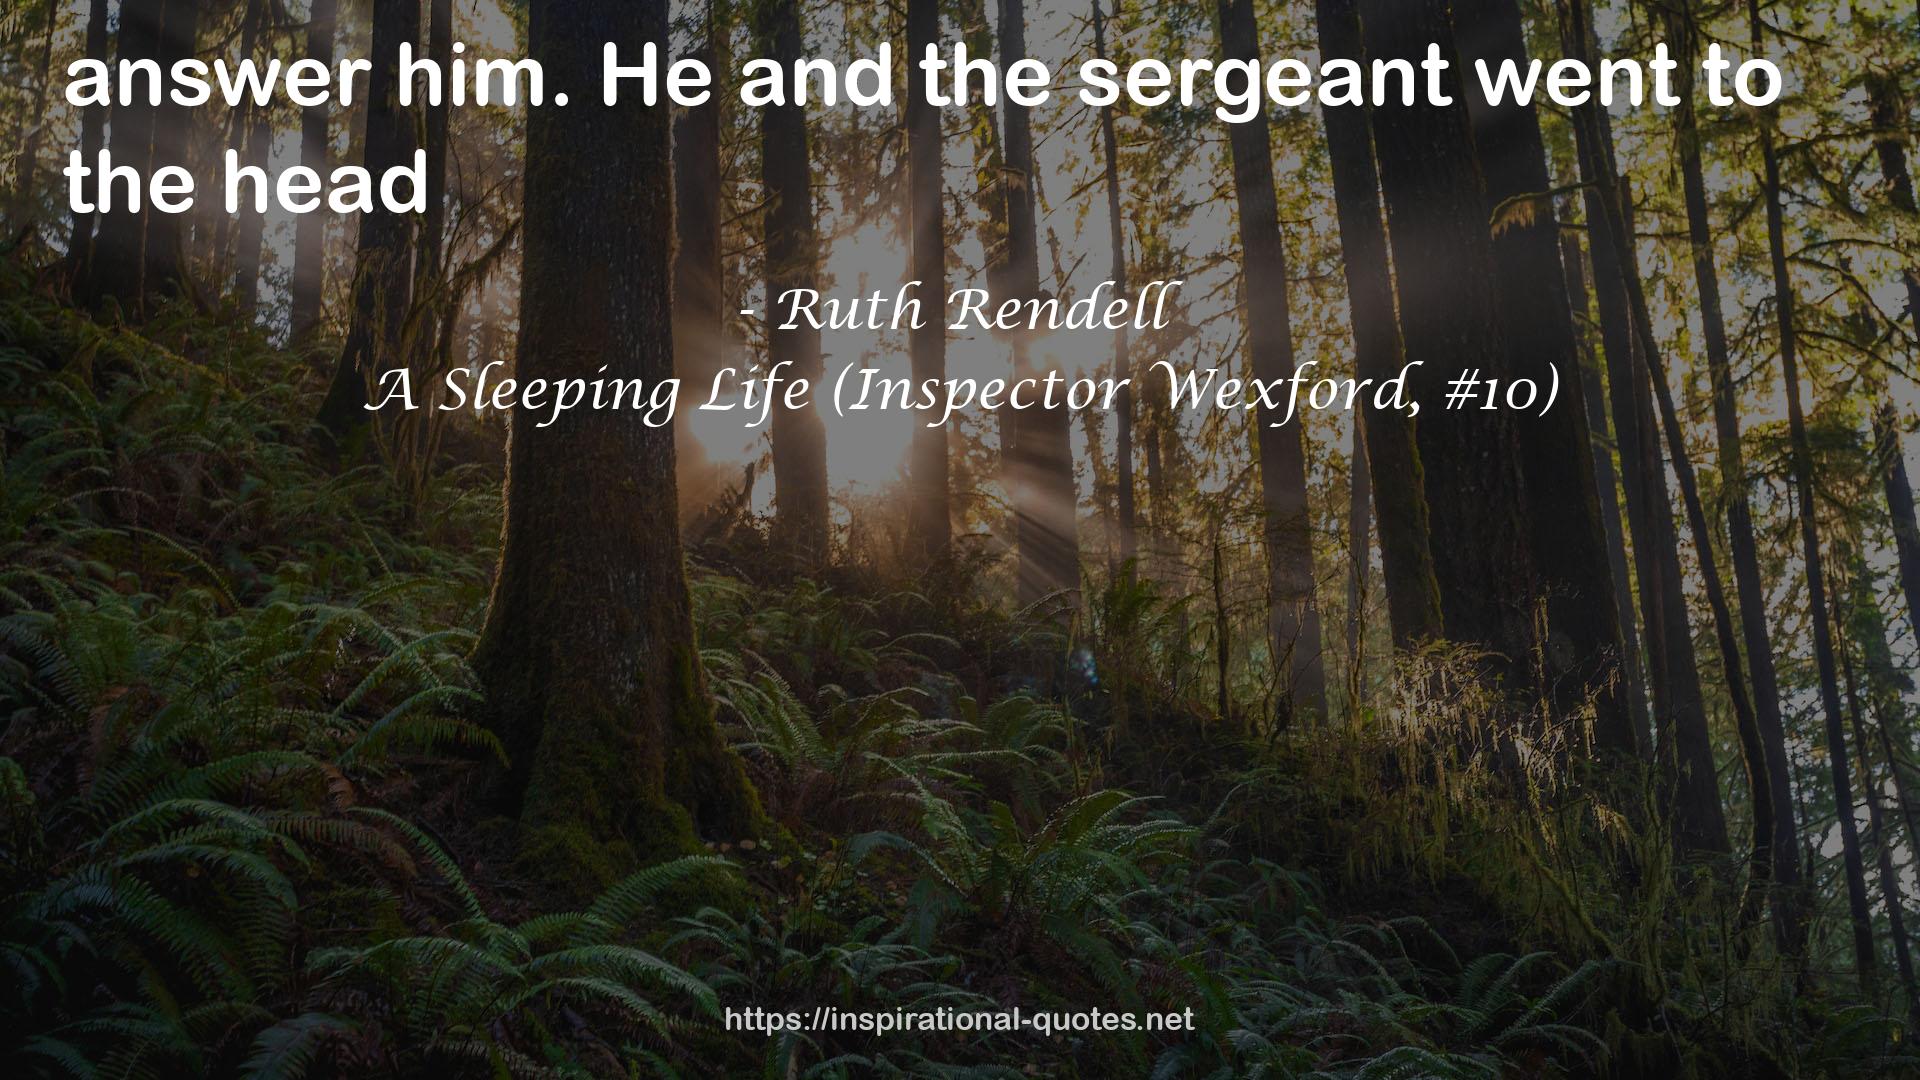 A Sleeping Life (Inspector Wexford, #10) QUOTES